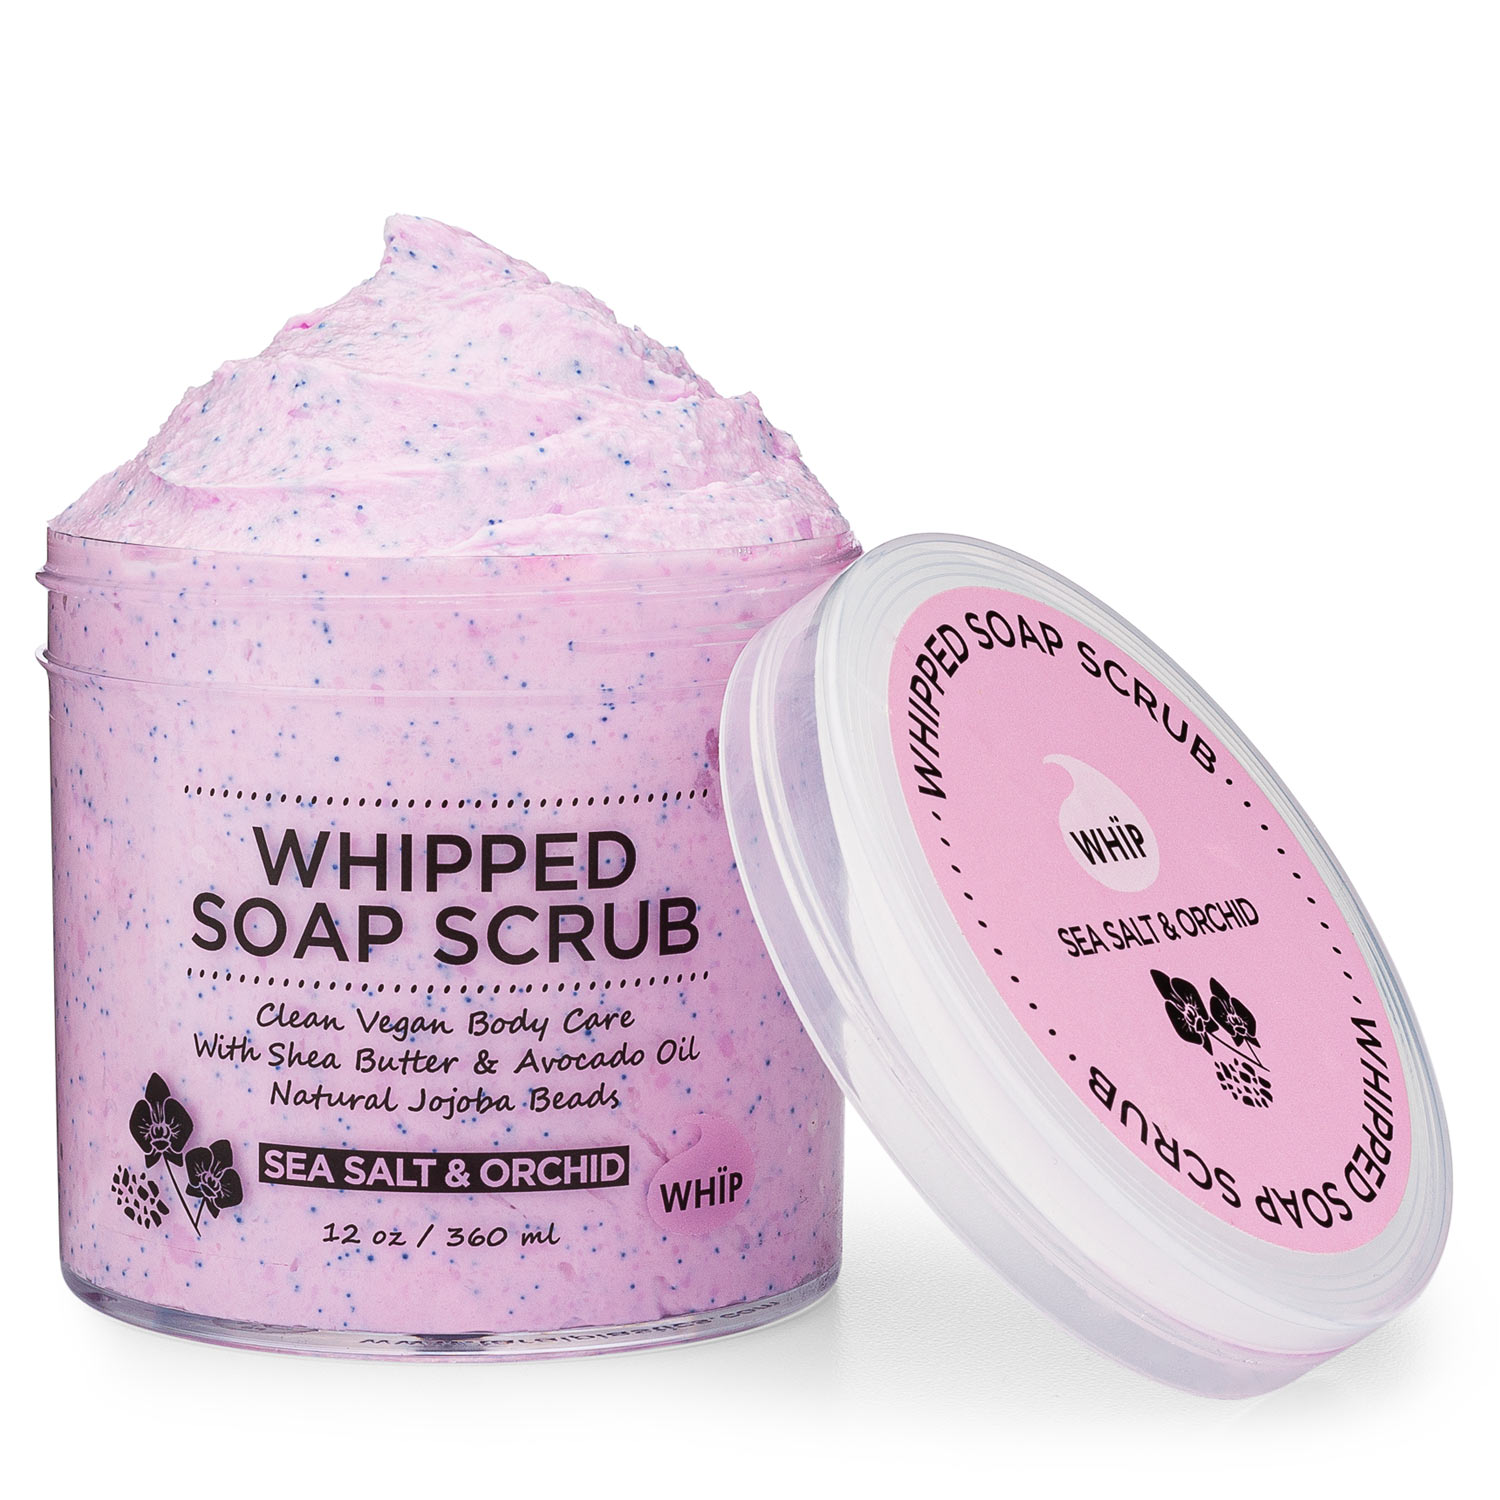 Whipped-Soap-Scrub---Sea-Salt-and-Orchid-WHÏP